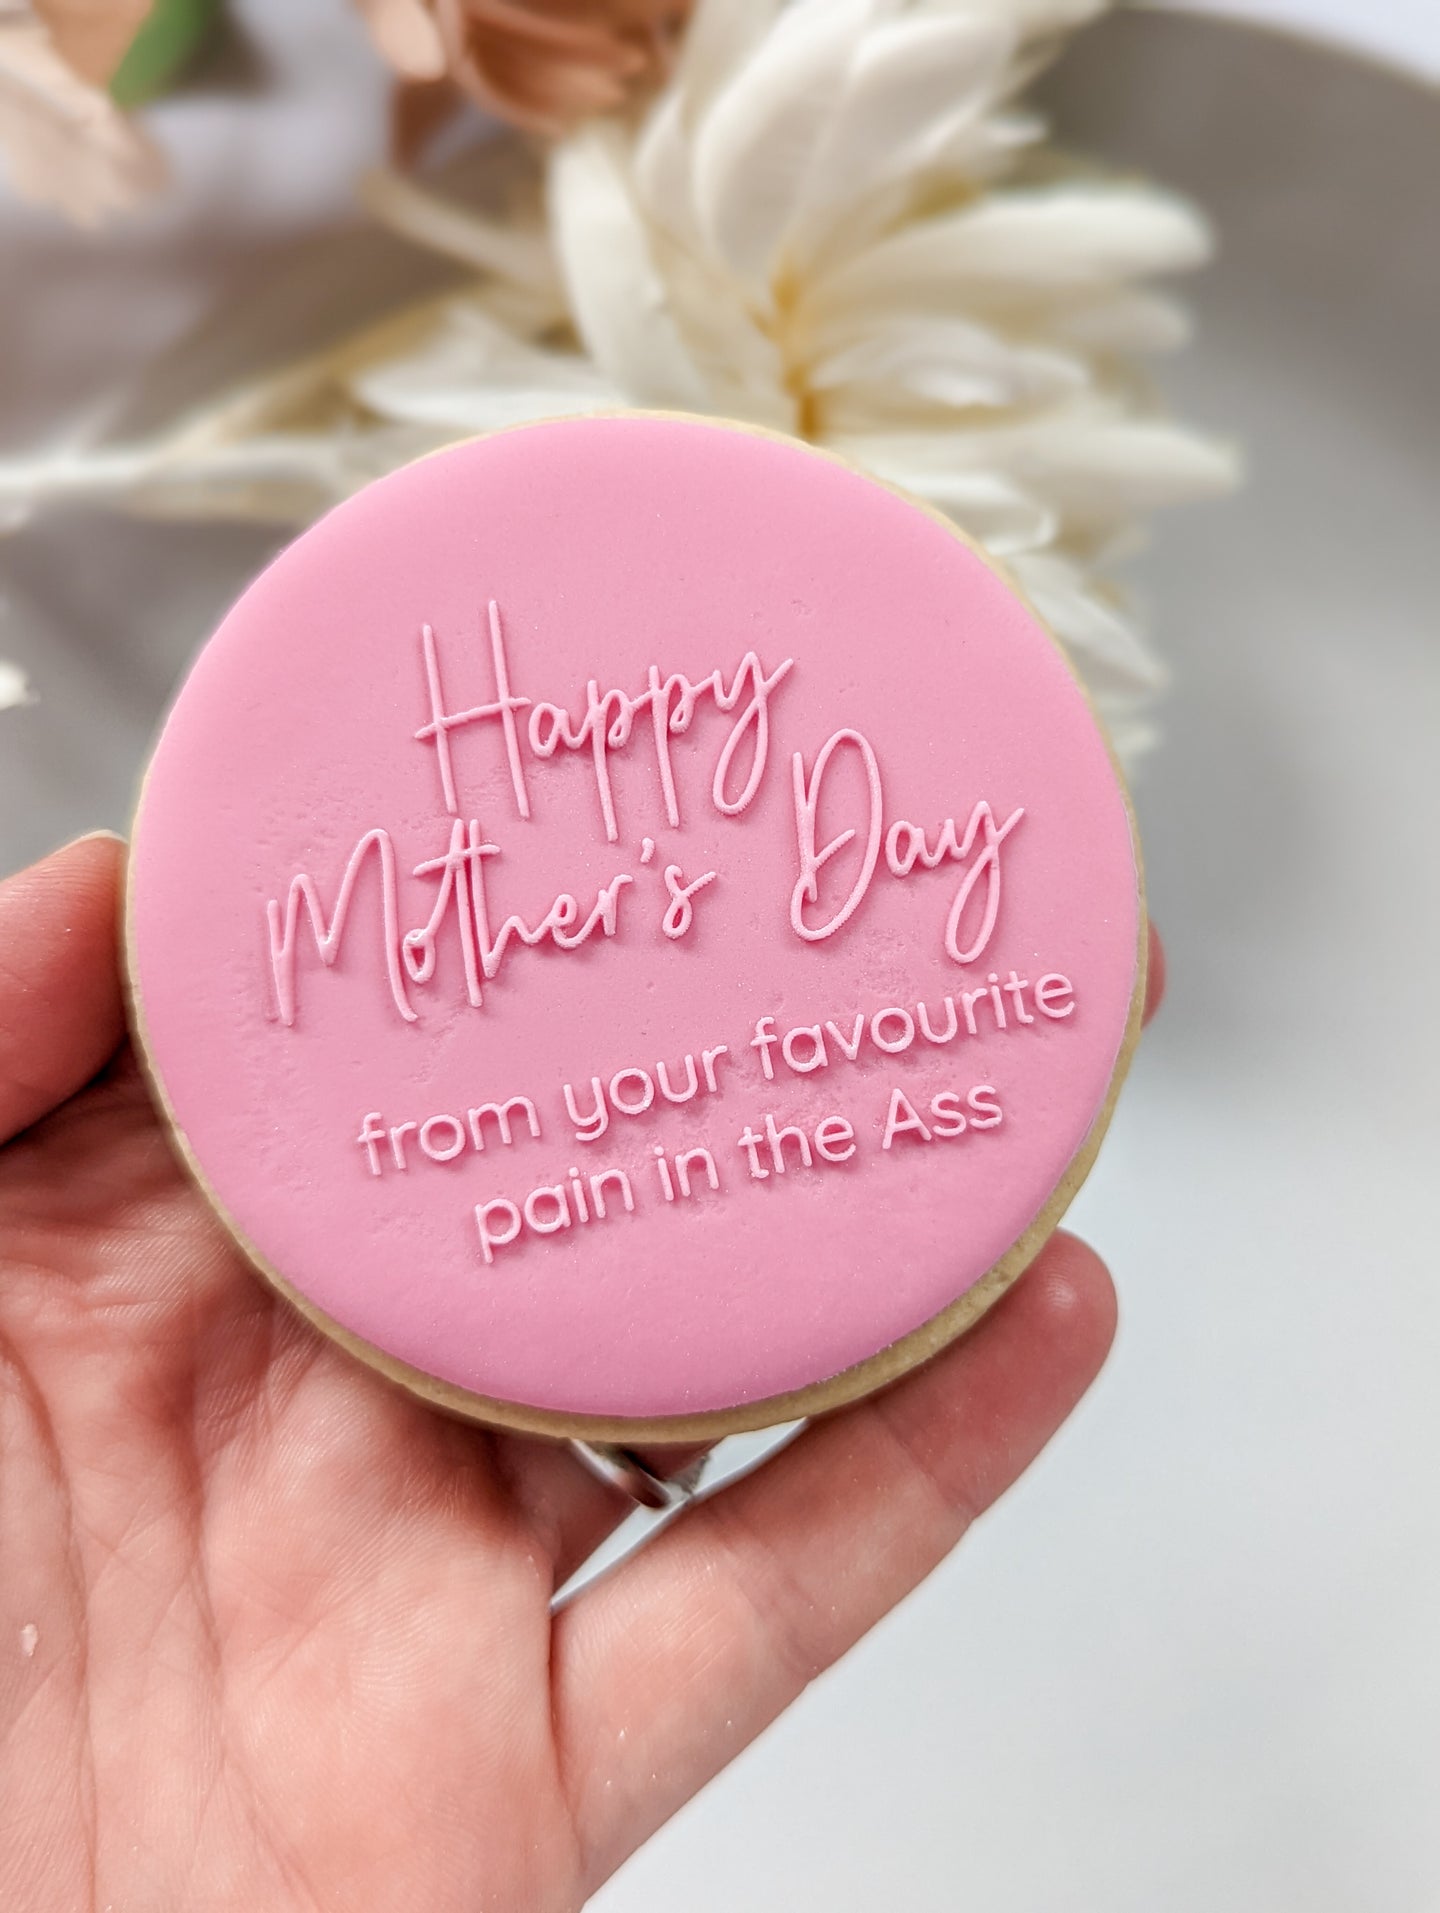 Happy Mothers day from pain in Ass Fondant debosser